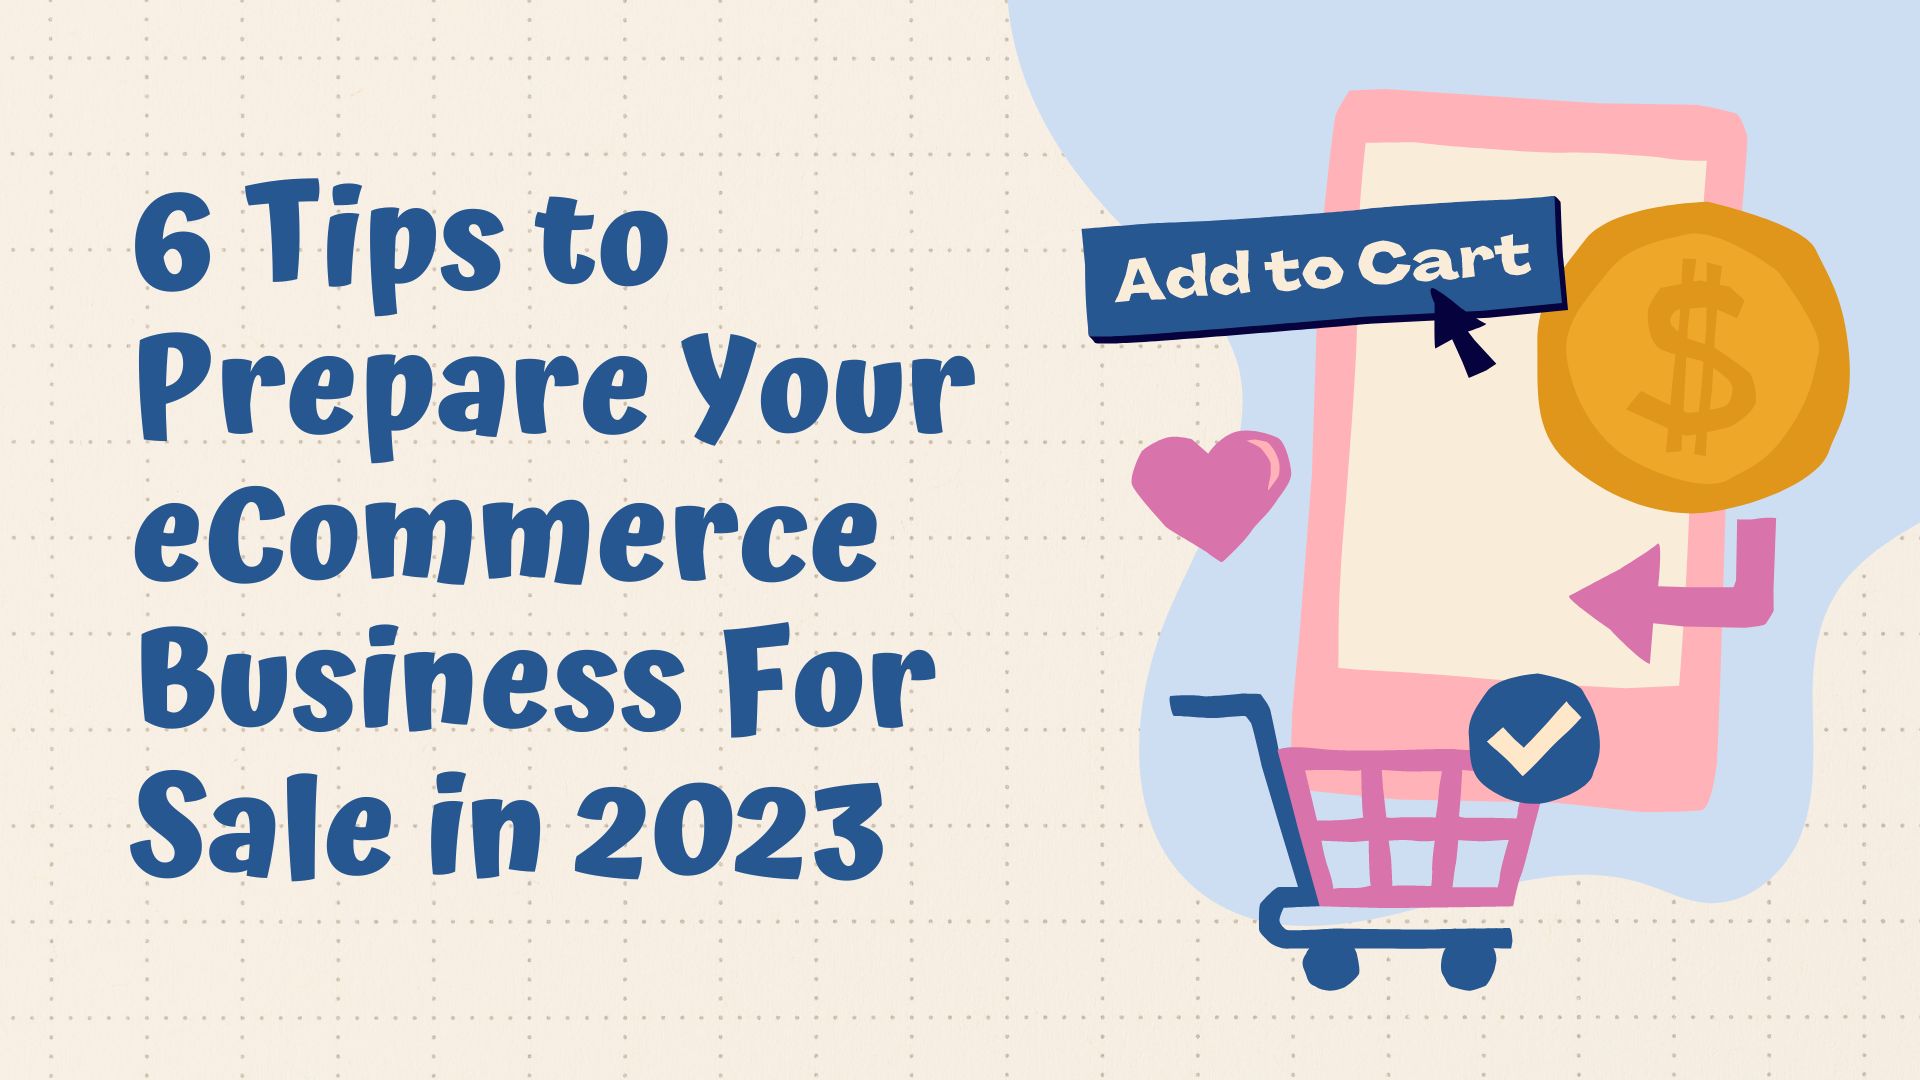 6 tips to prepare your ecommerce business for sale in 2023